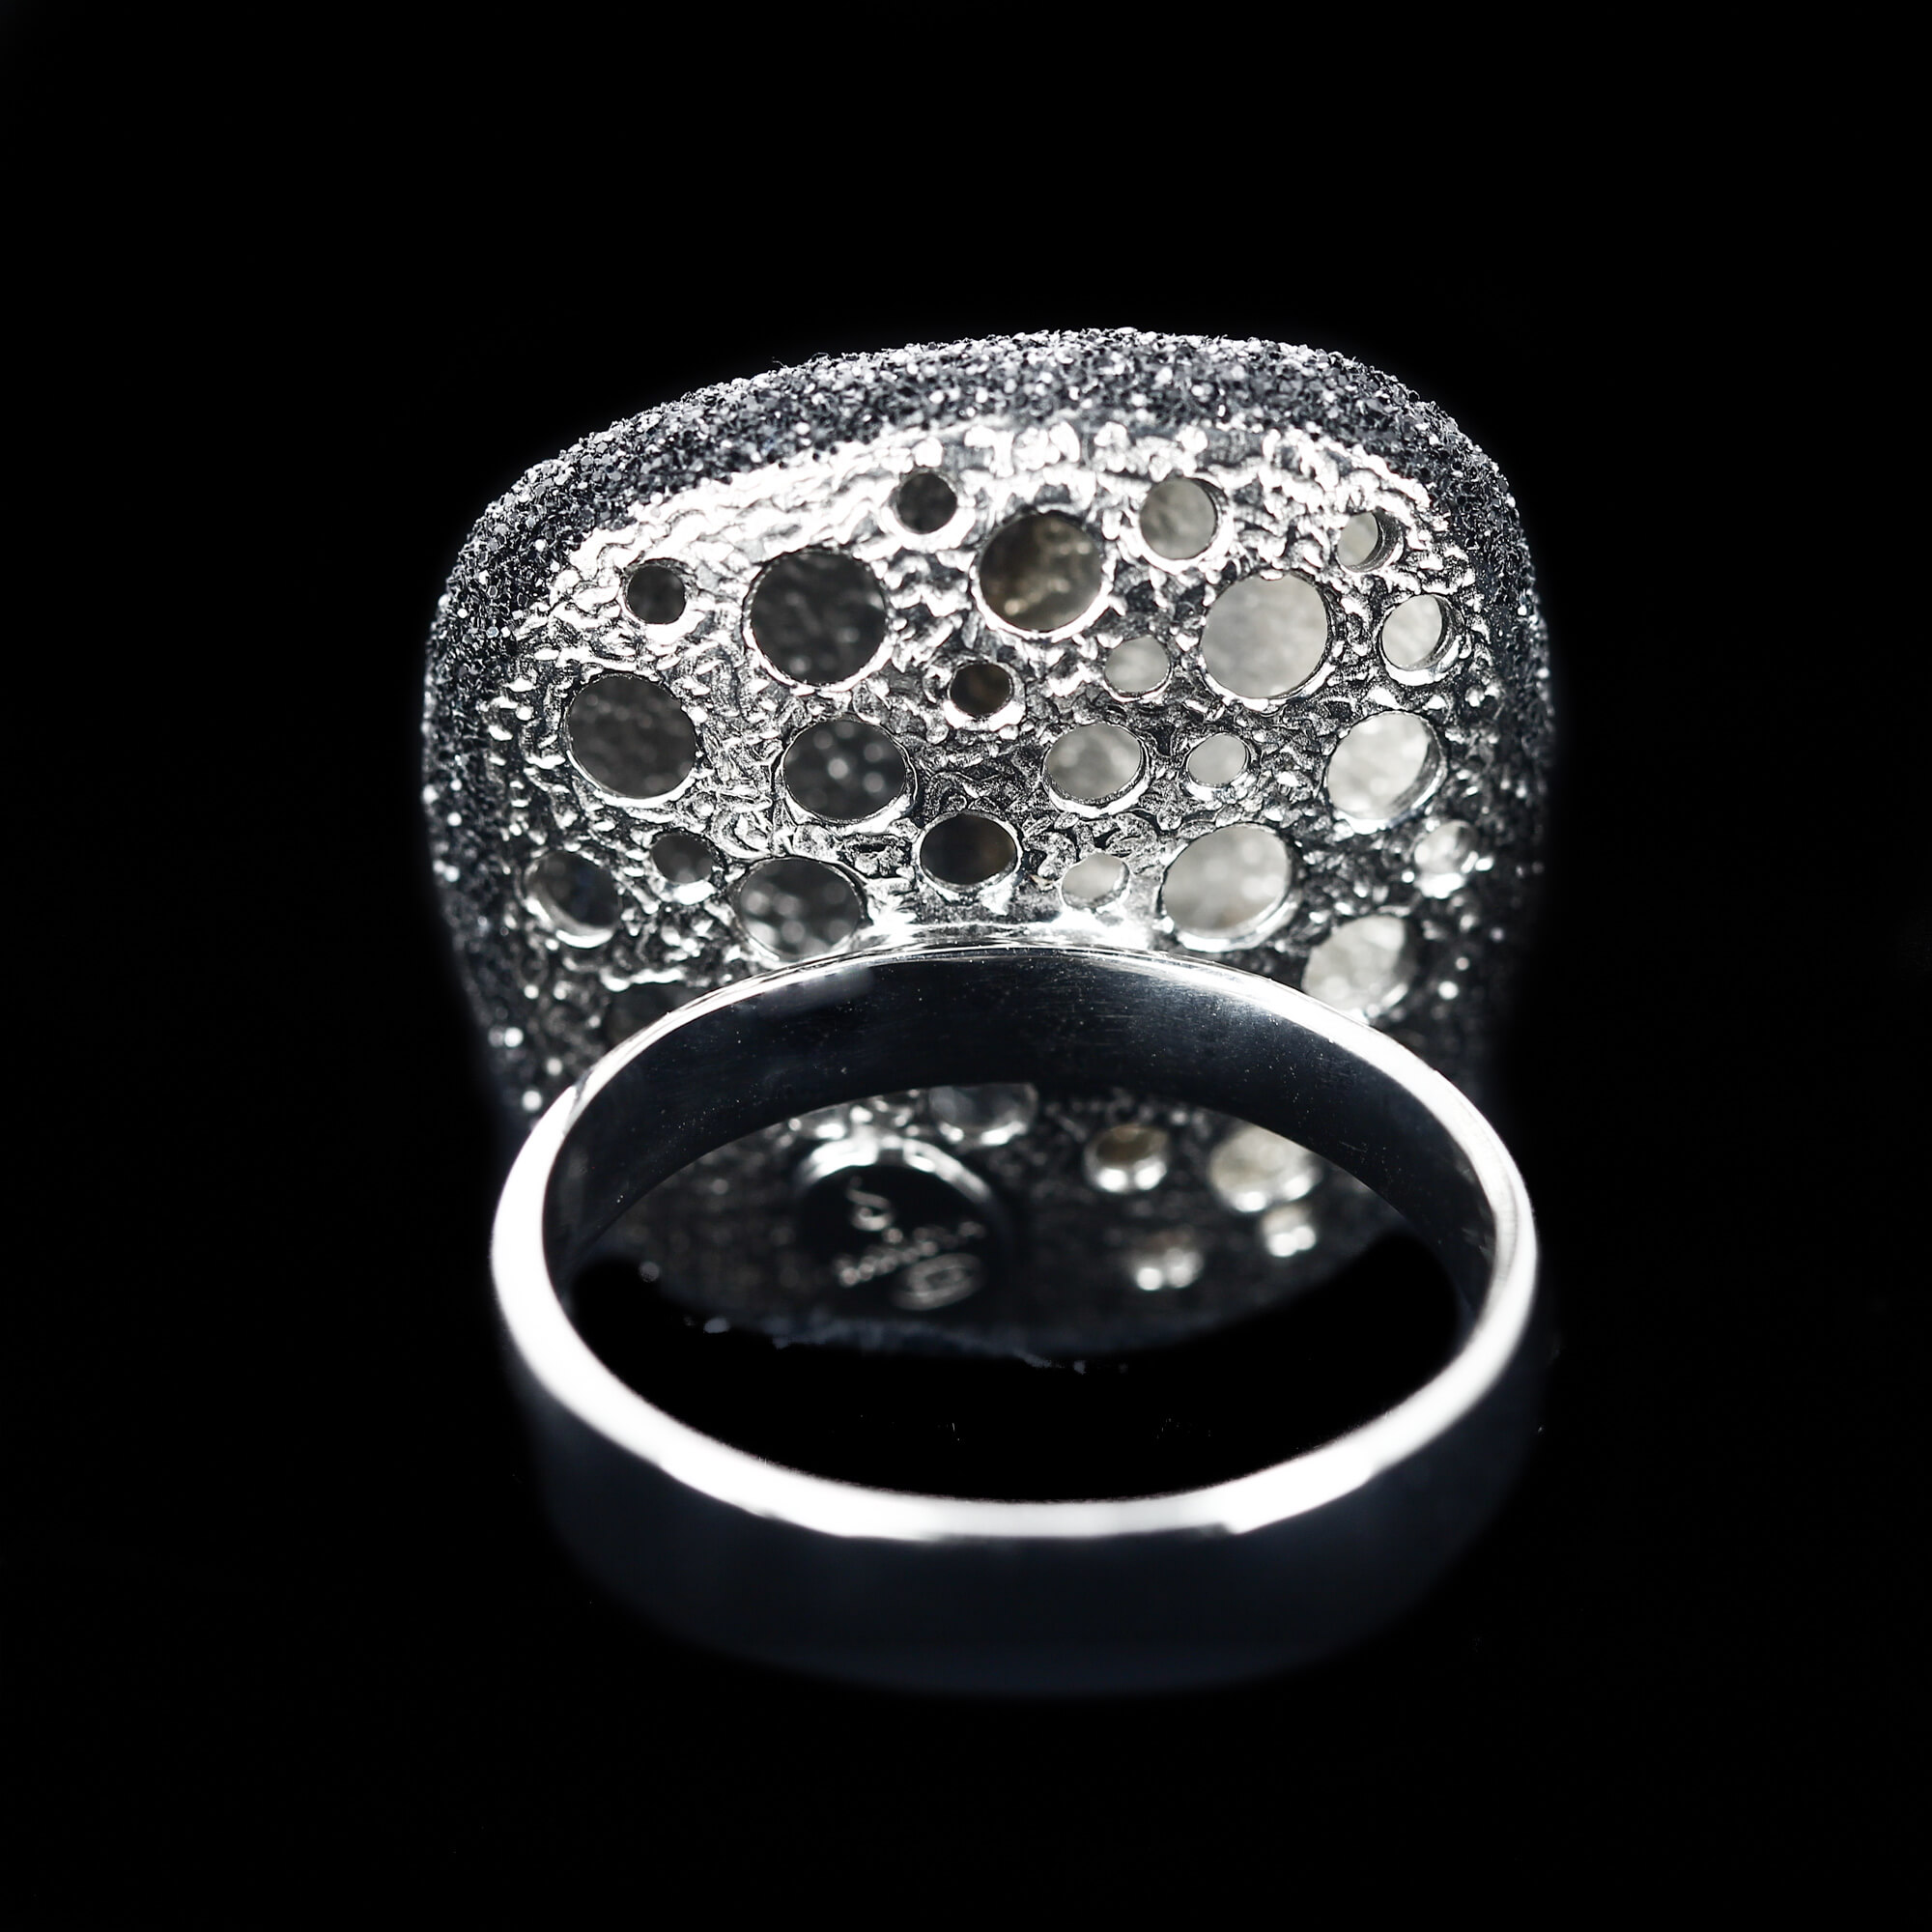 Beautiful black ring from sterling silver